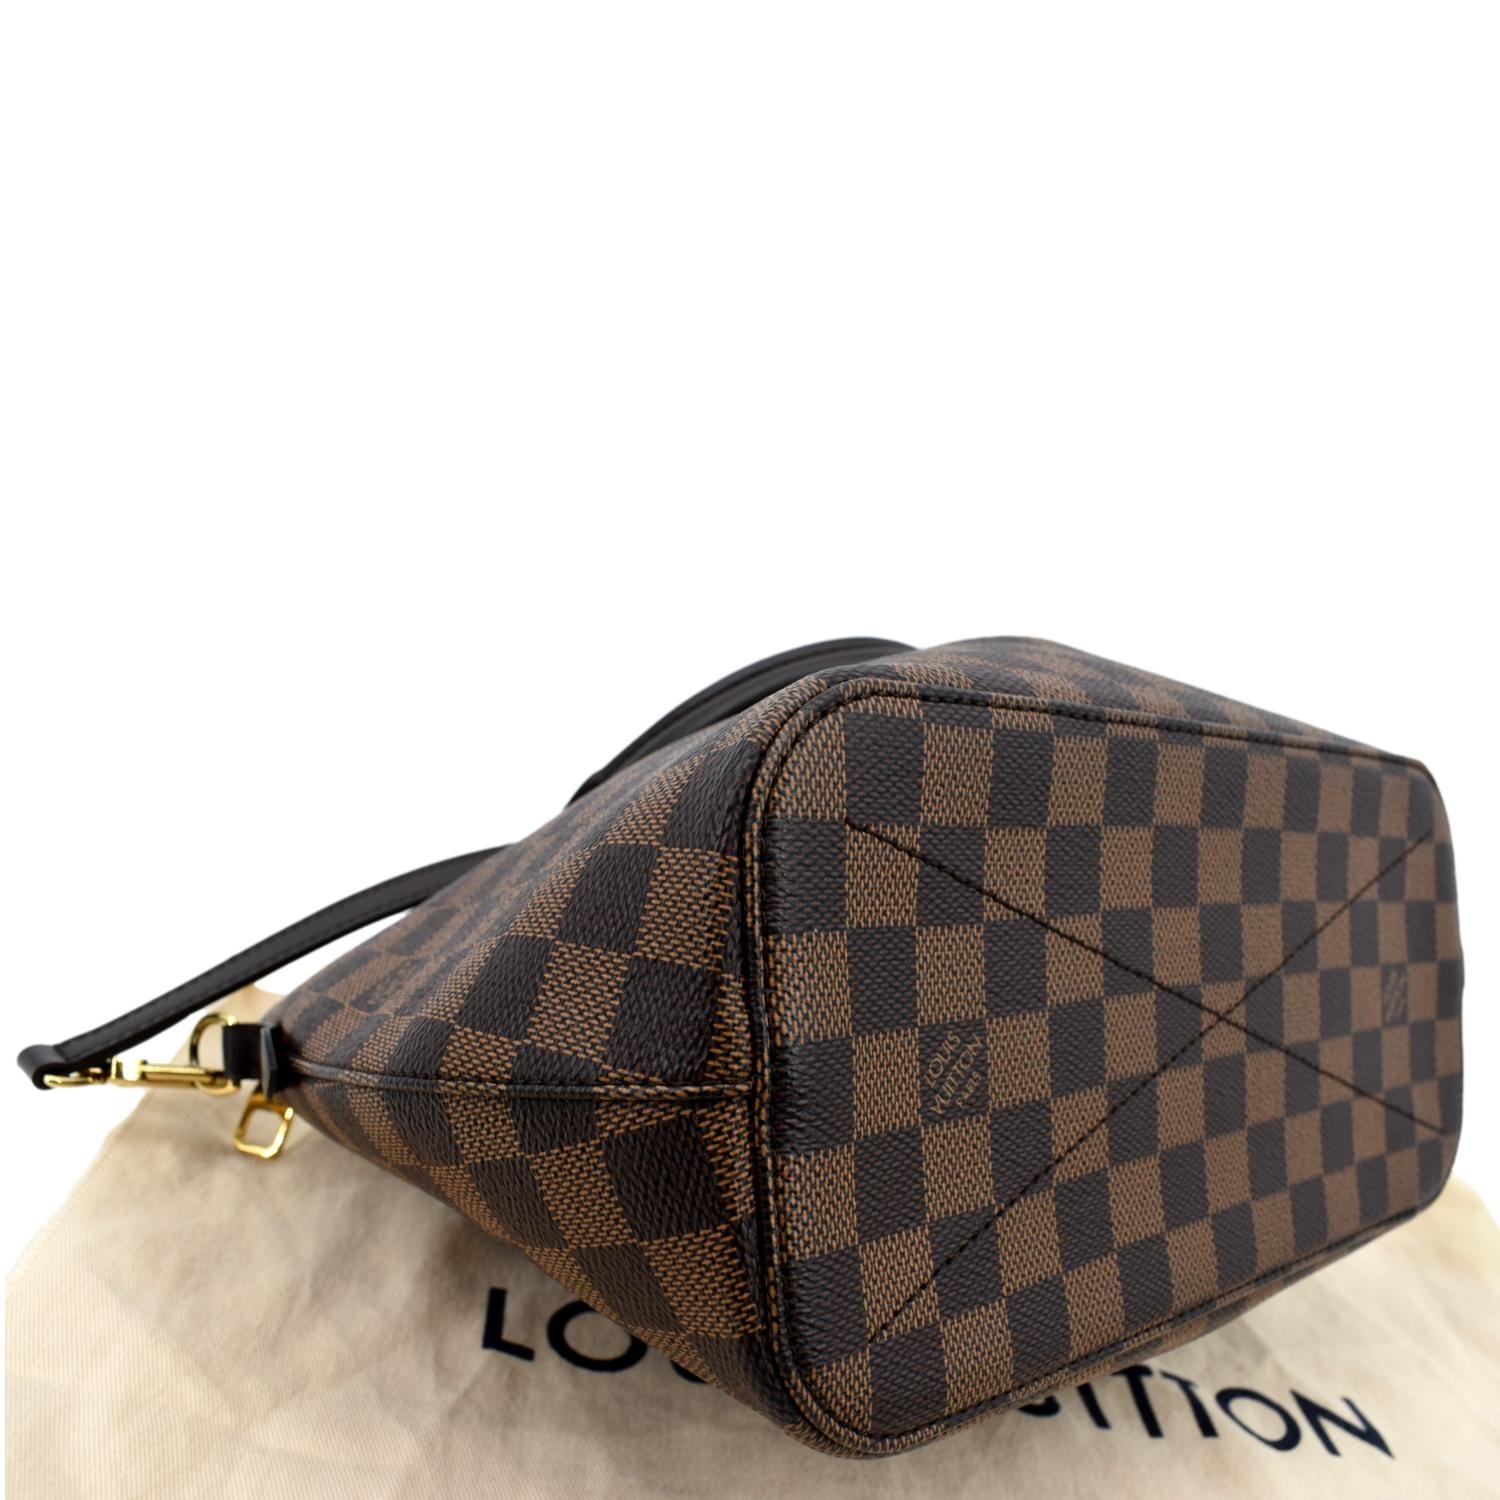 Siena leather handbag Louis Vuitton Brown in Leather - 29212158